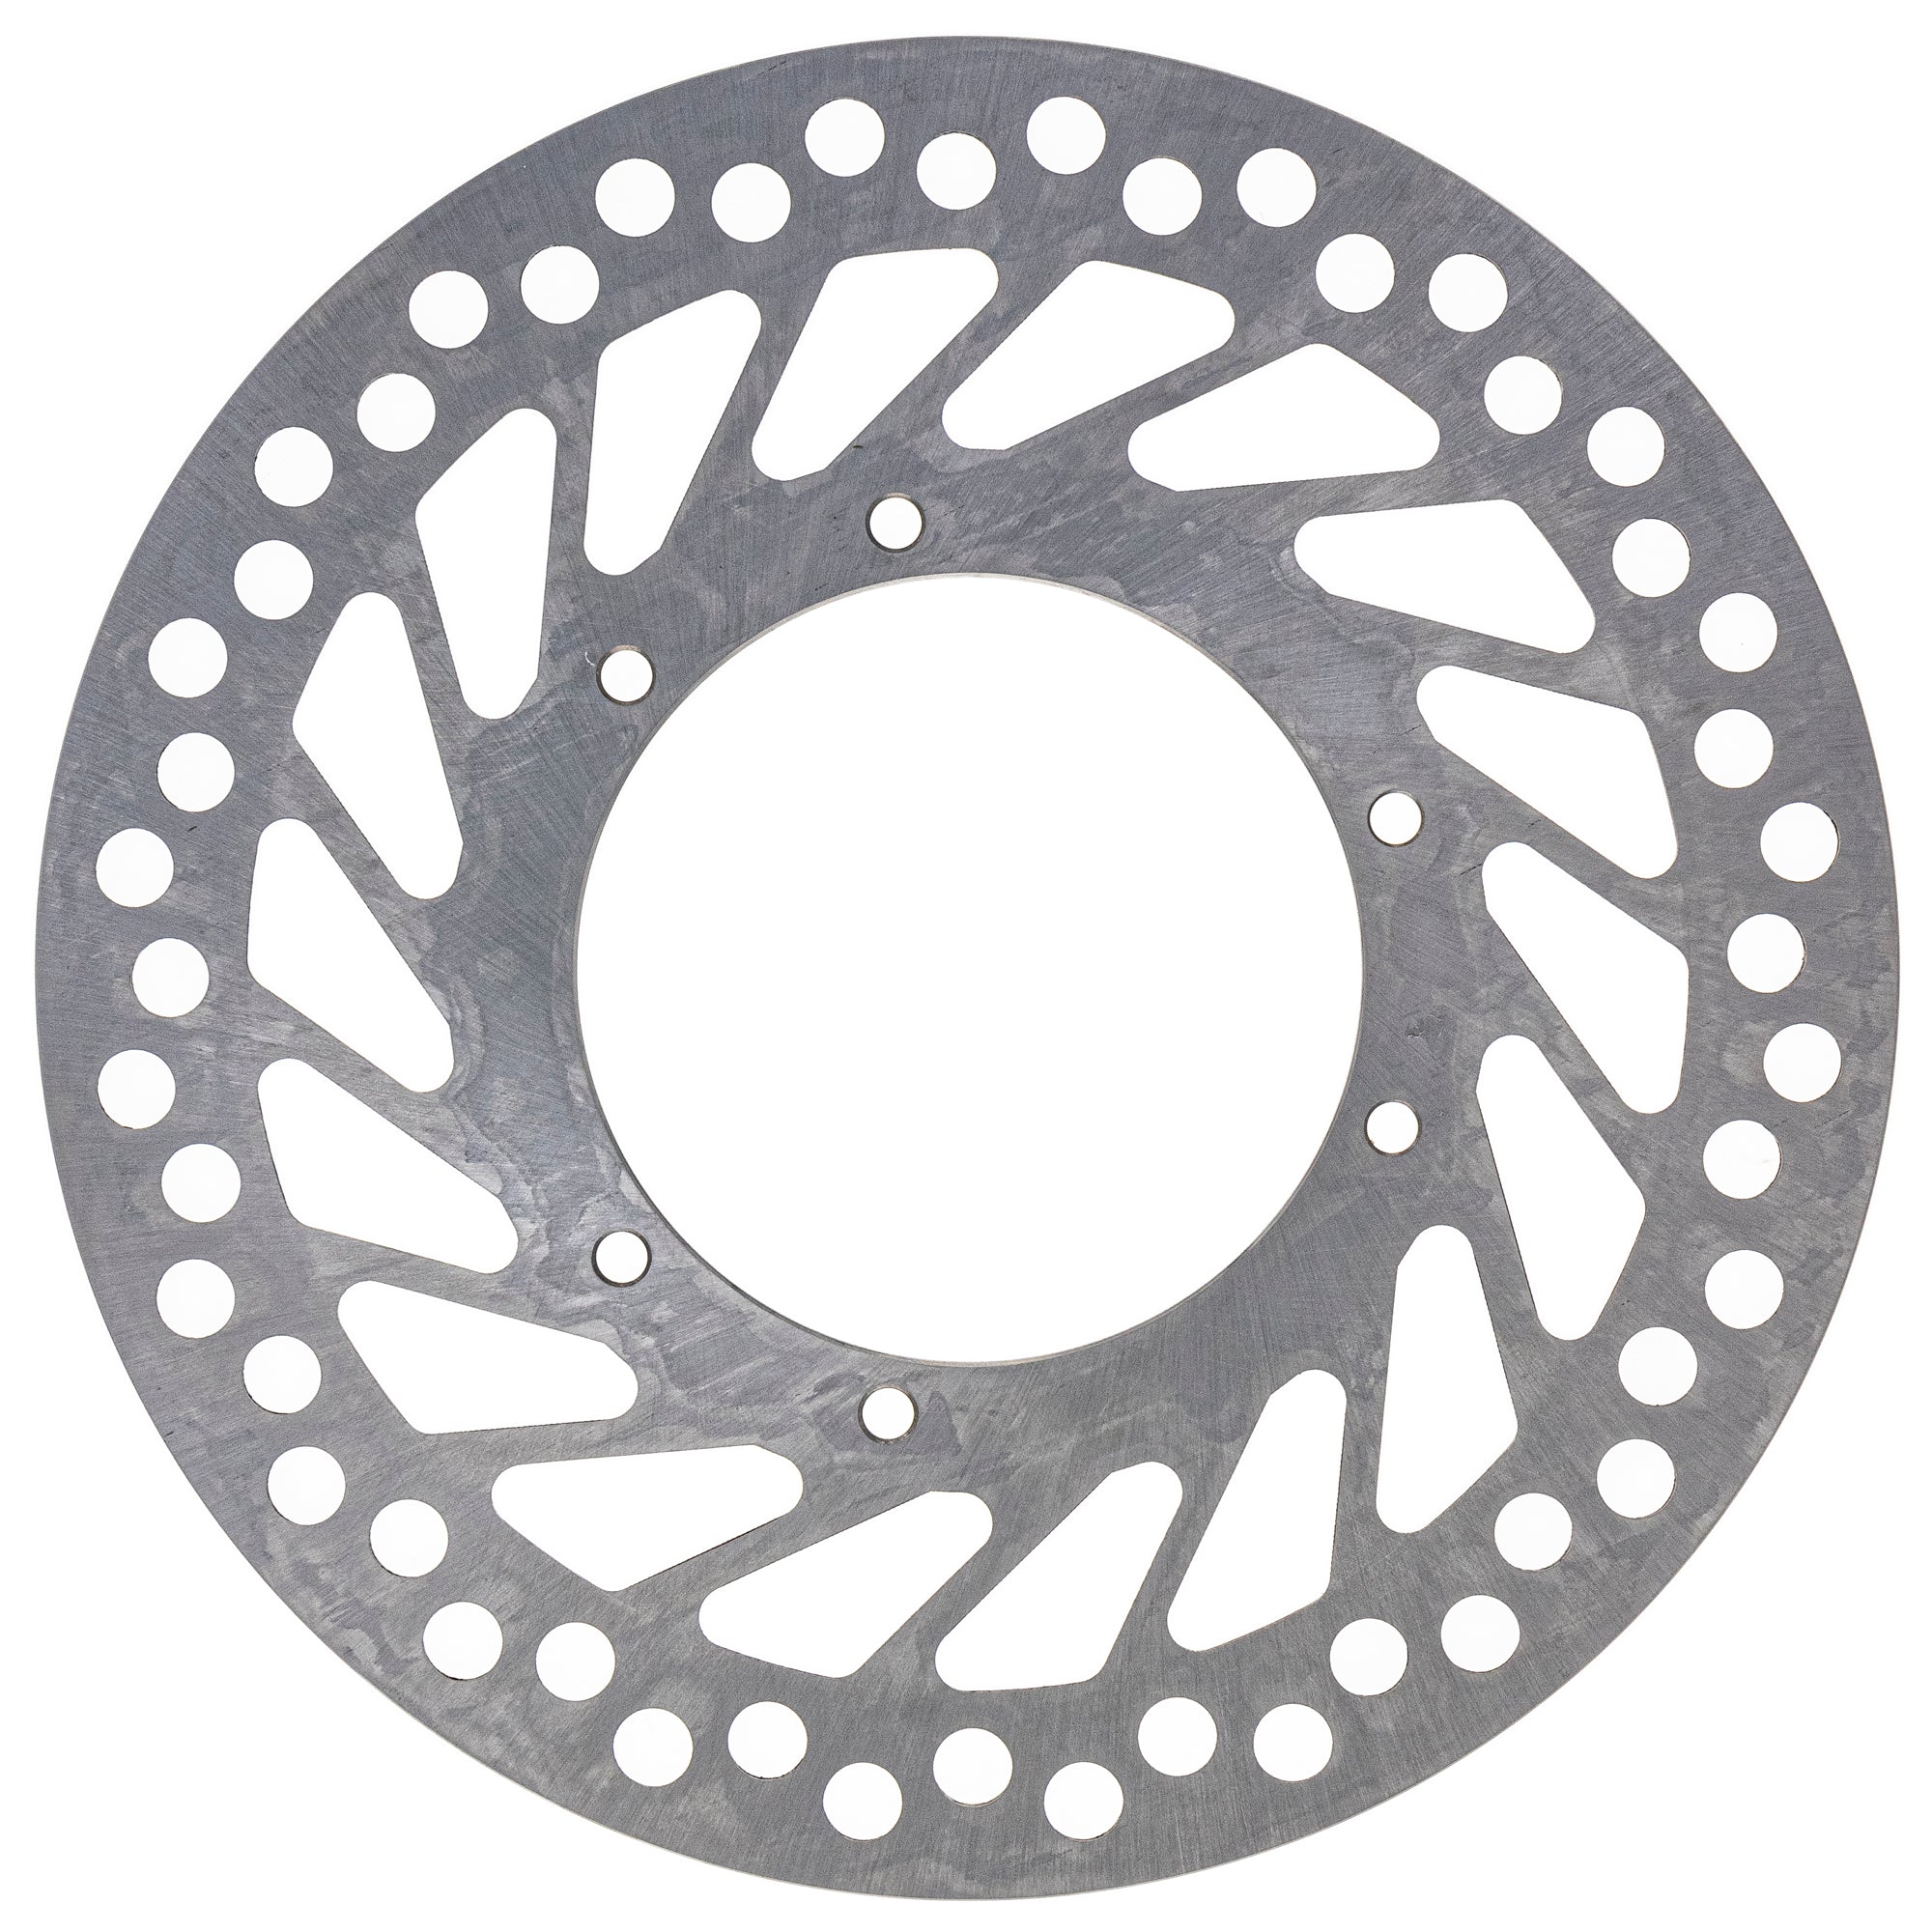 Front Brake Rotor for zOTHER CRF450X CRF450R CRF250X CRF250R NICHE 519-CRT2247R